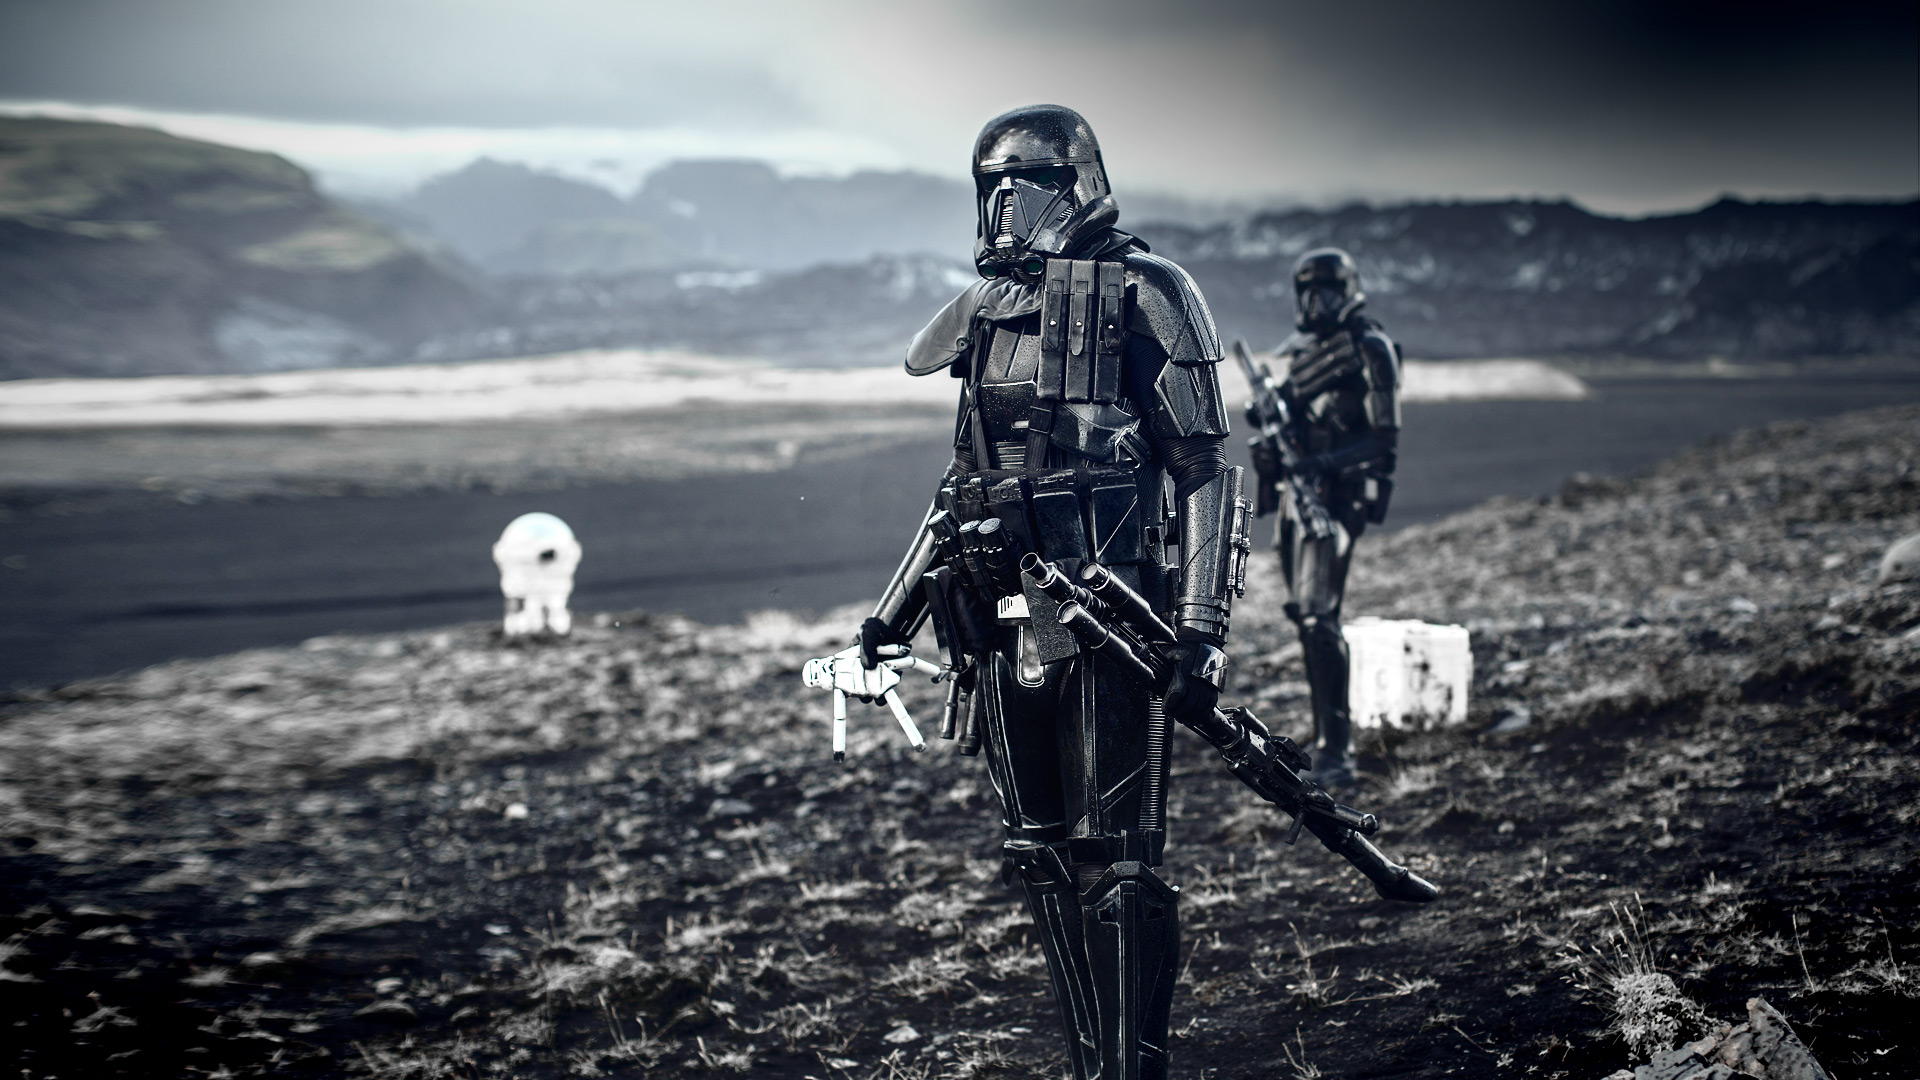 General 1920x1080 Star Wars Rogue One: A Star Wars Story Imperial Death Trooper stormtrooper Imperial Forces movies